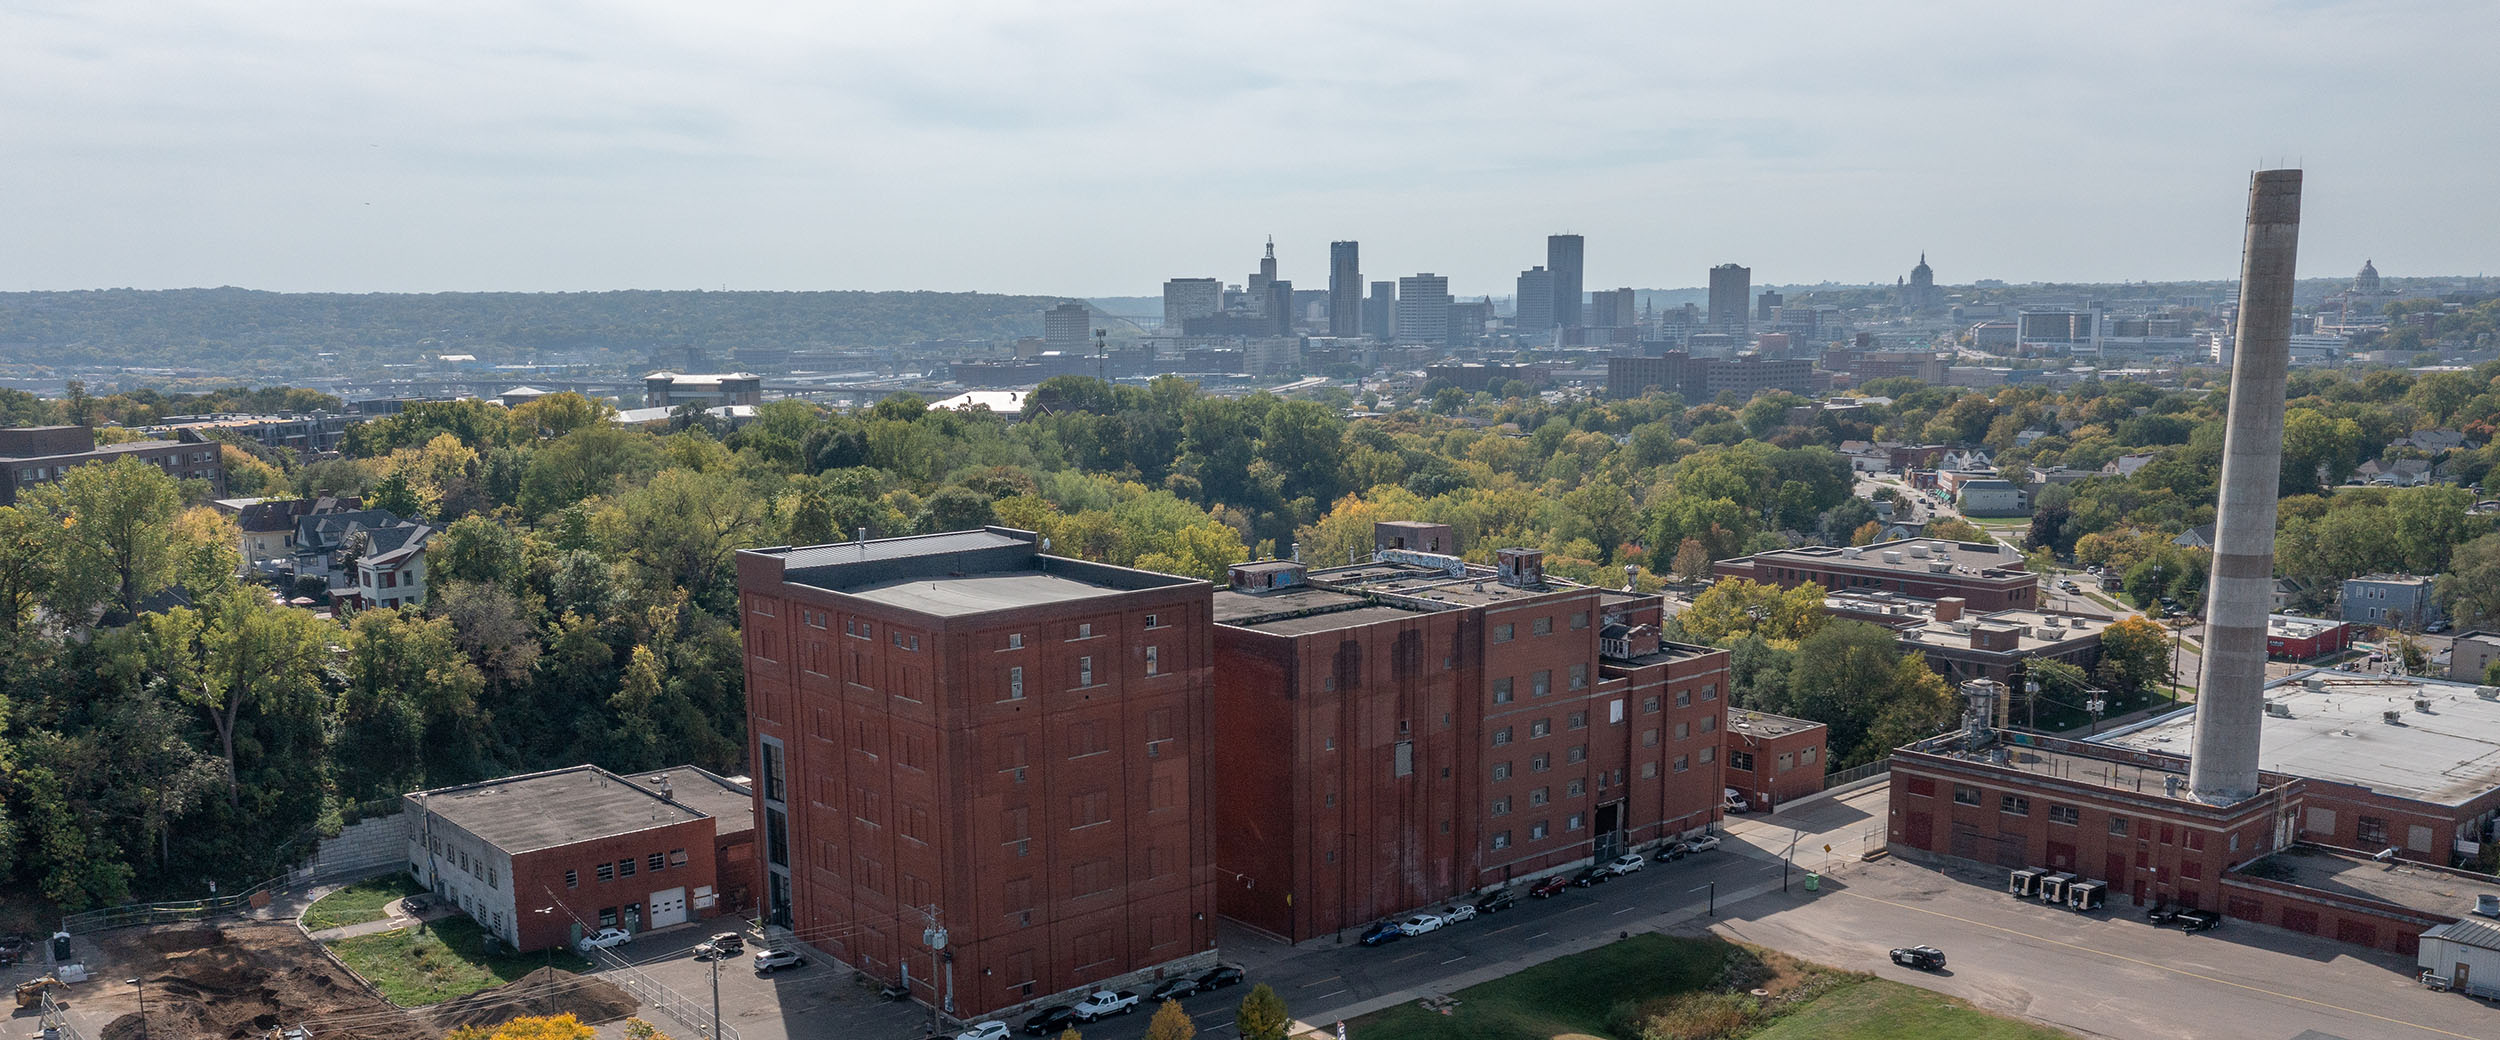 Hamm's Brewery Drone Shot with City Skyline